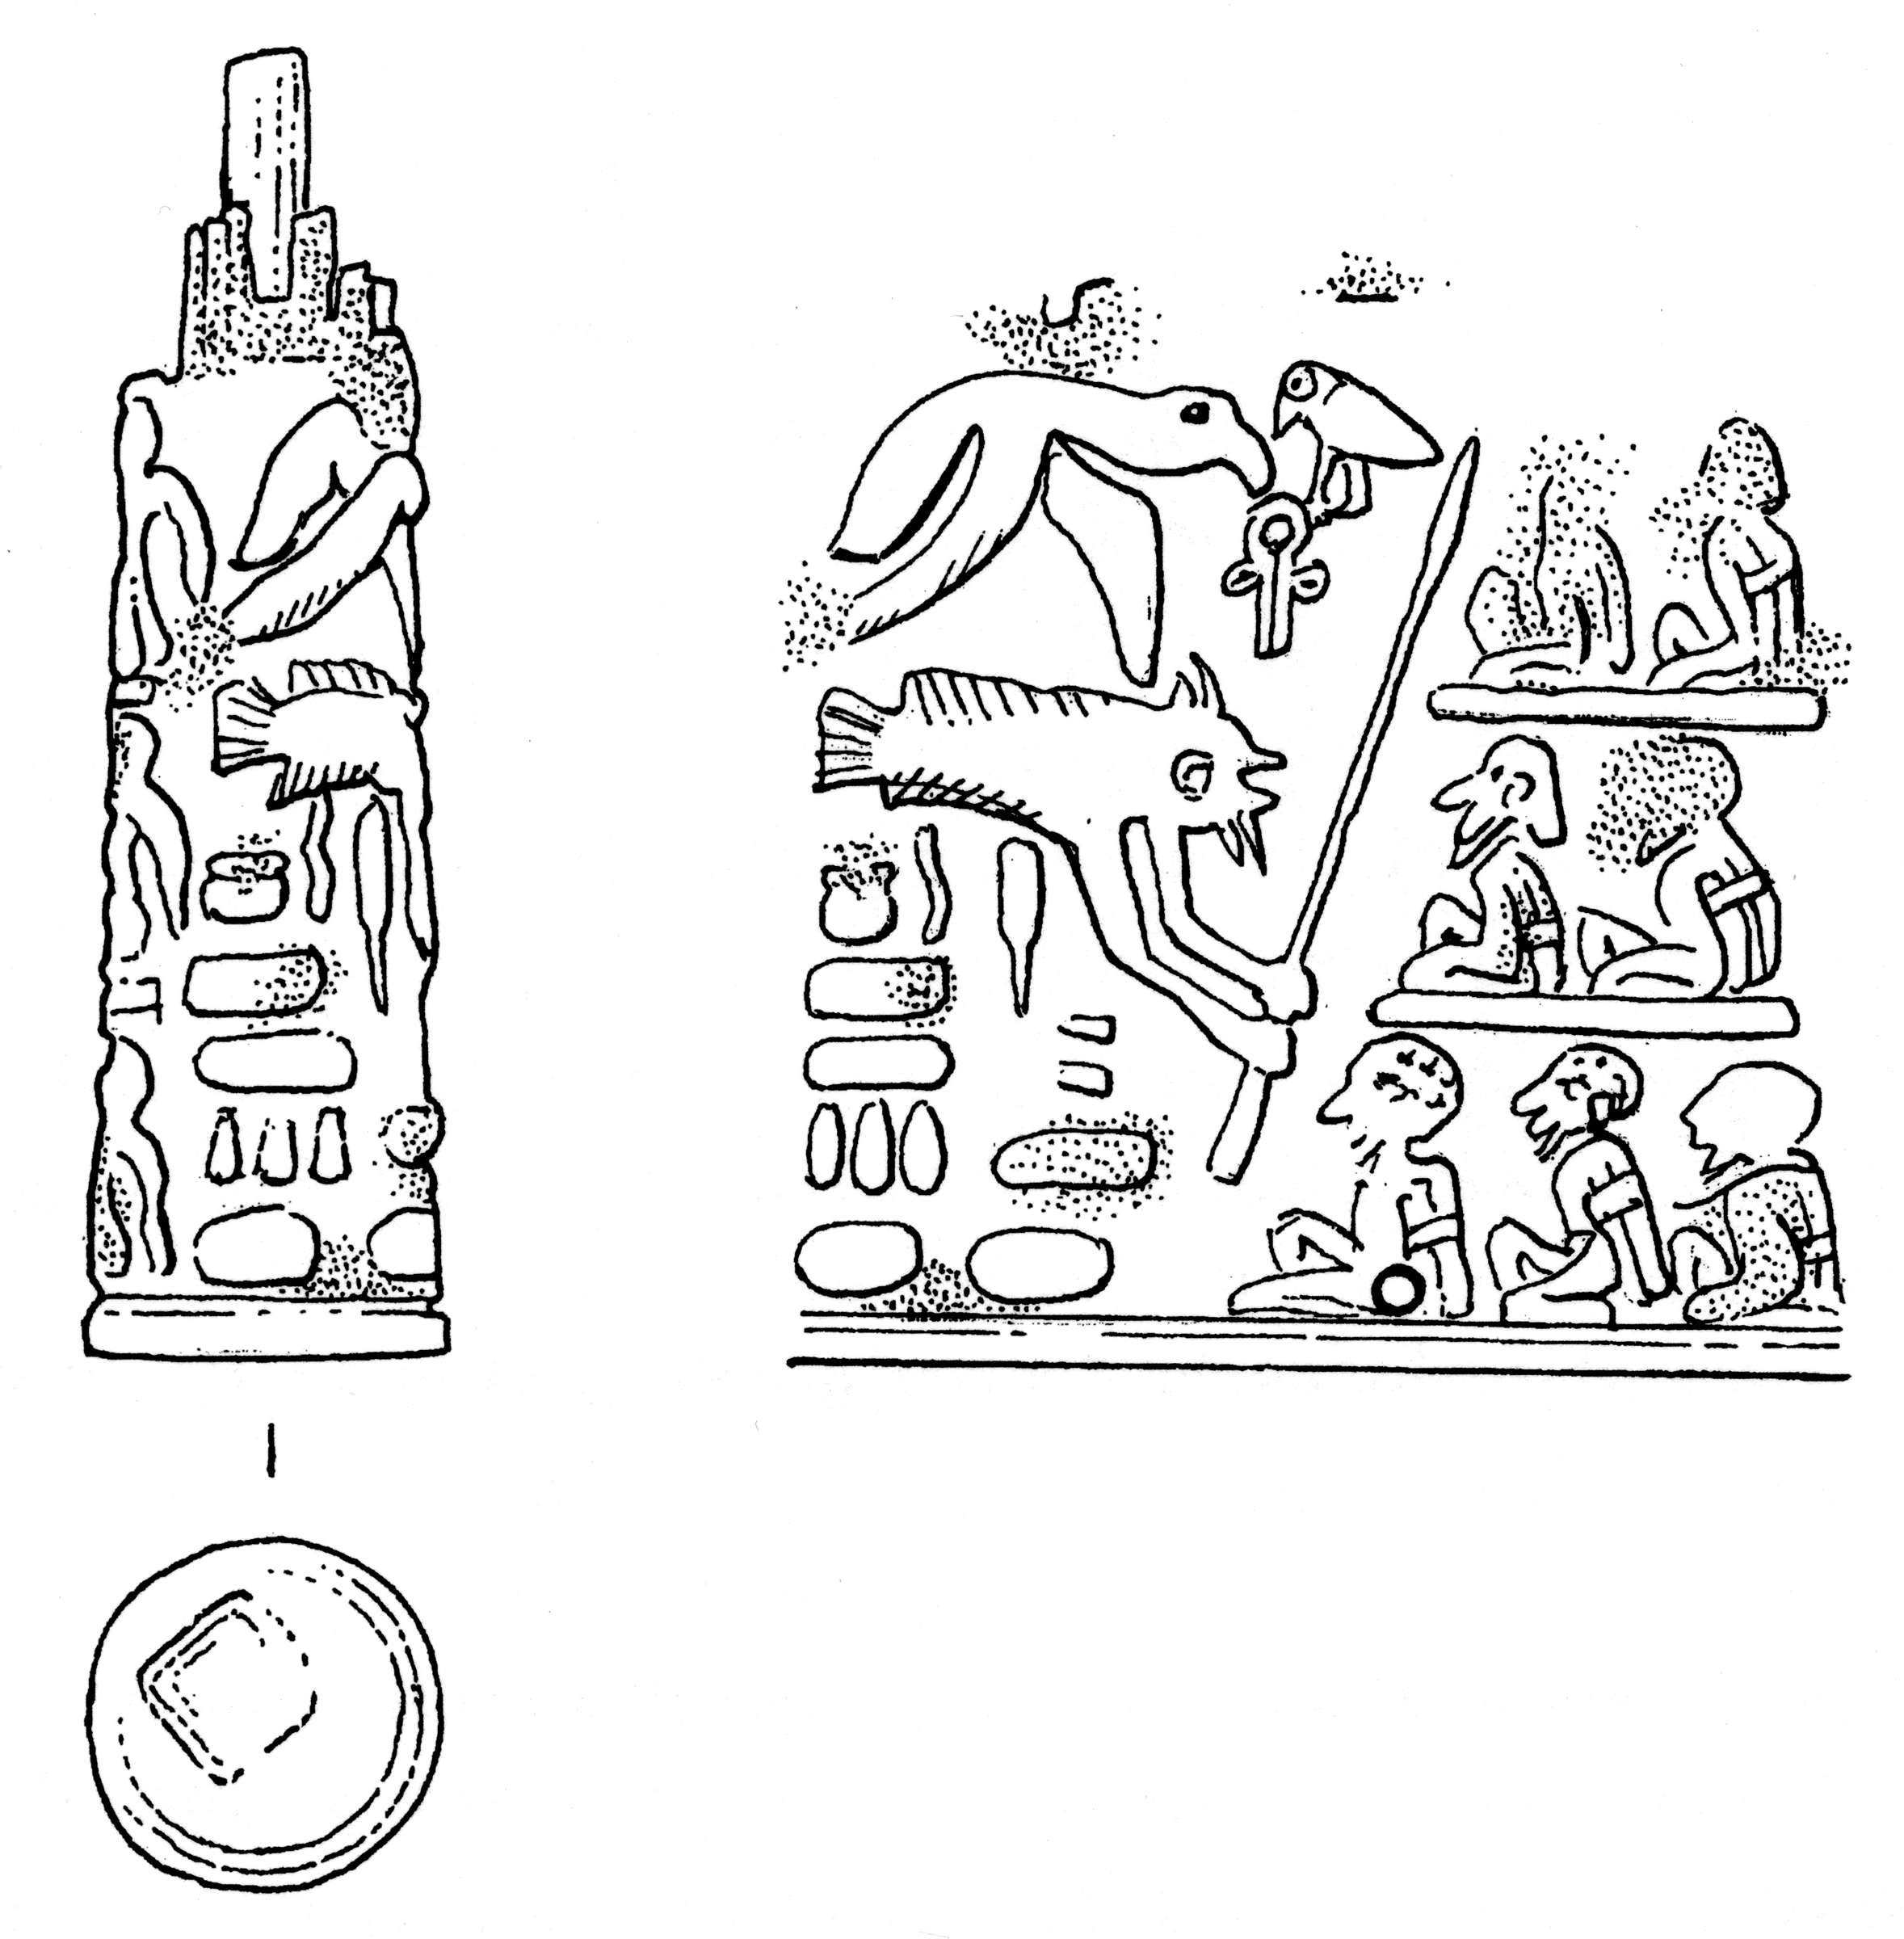 The Narmer cylinder